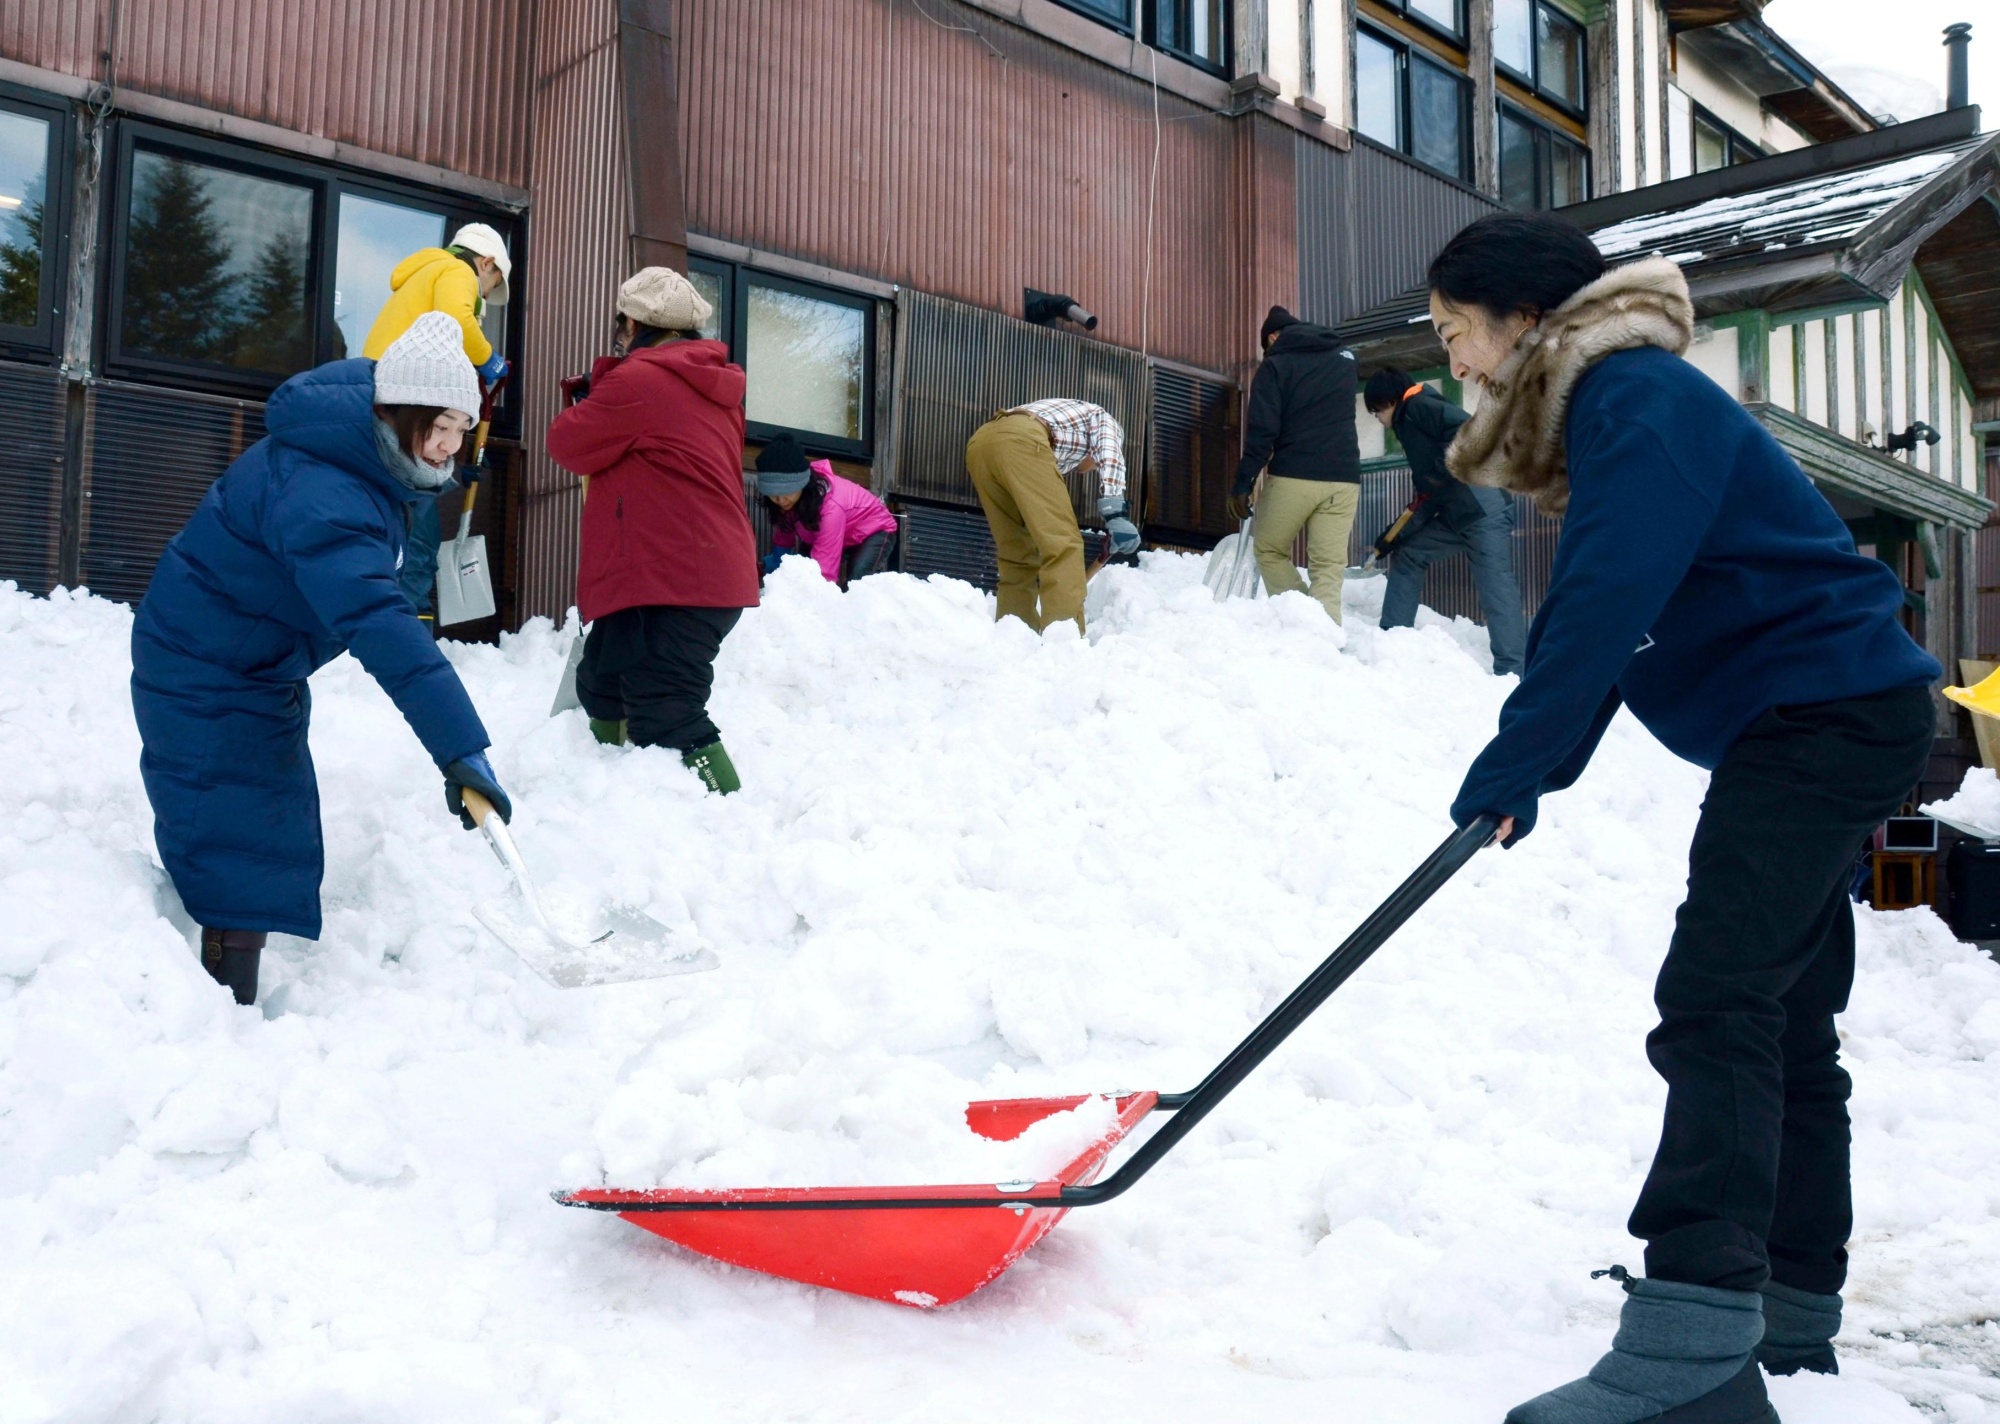 Snow problem: Group in Fukushima town promotes shoveling as way to